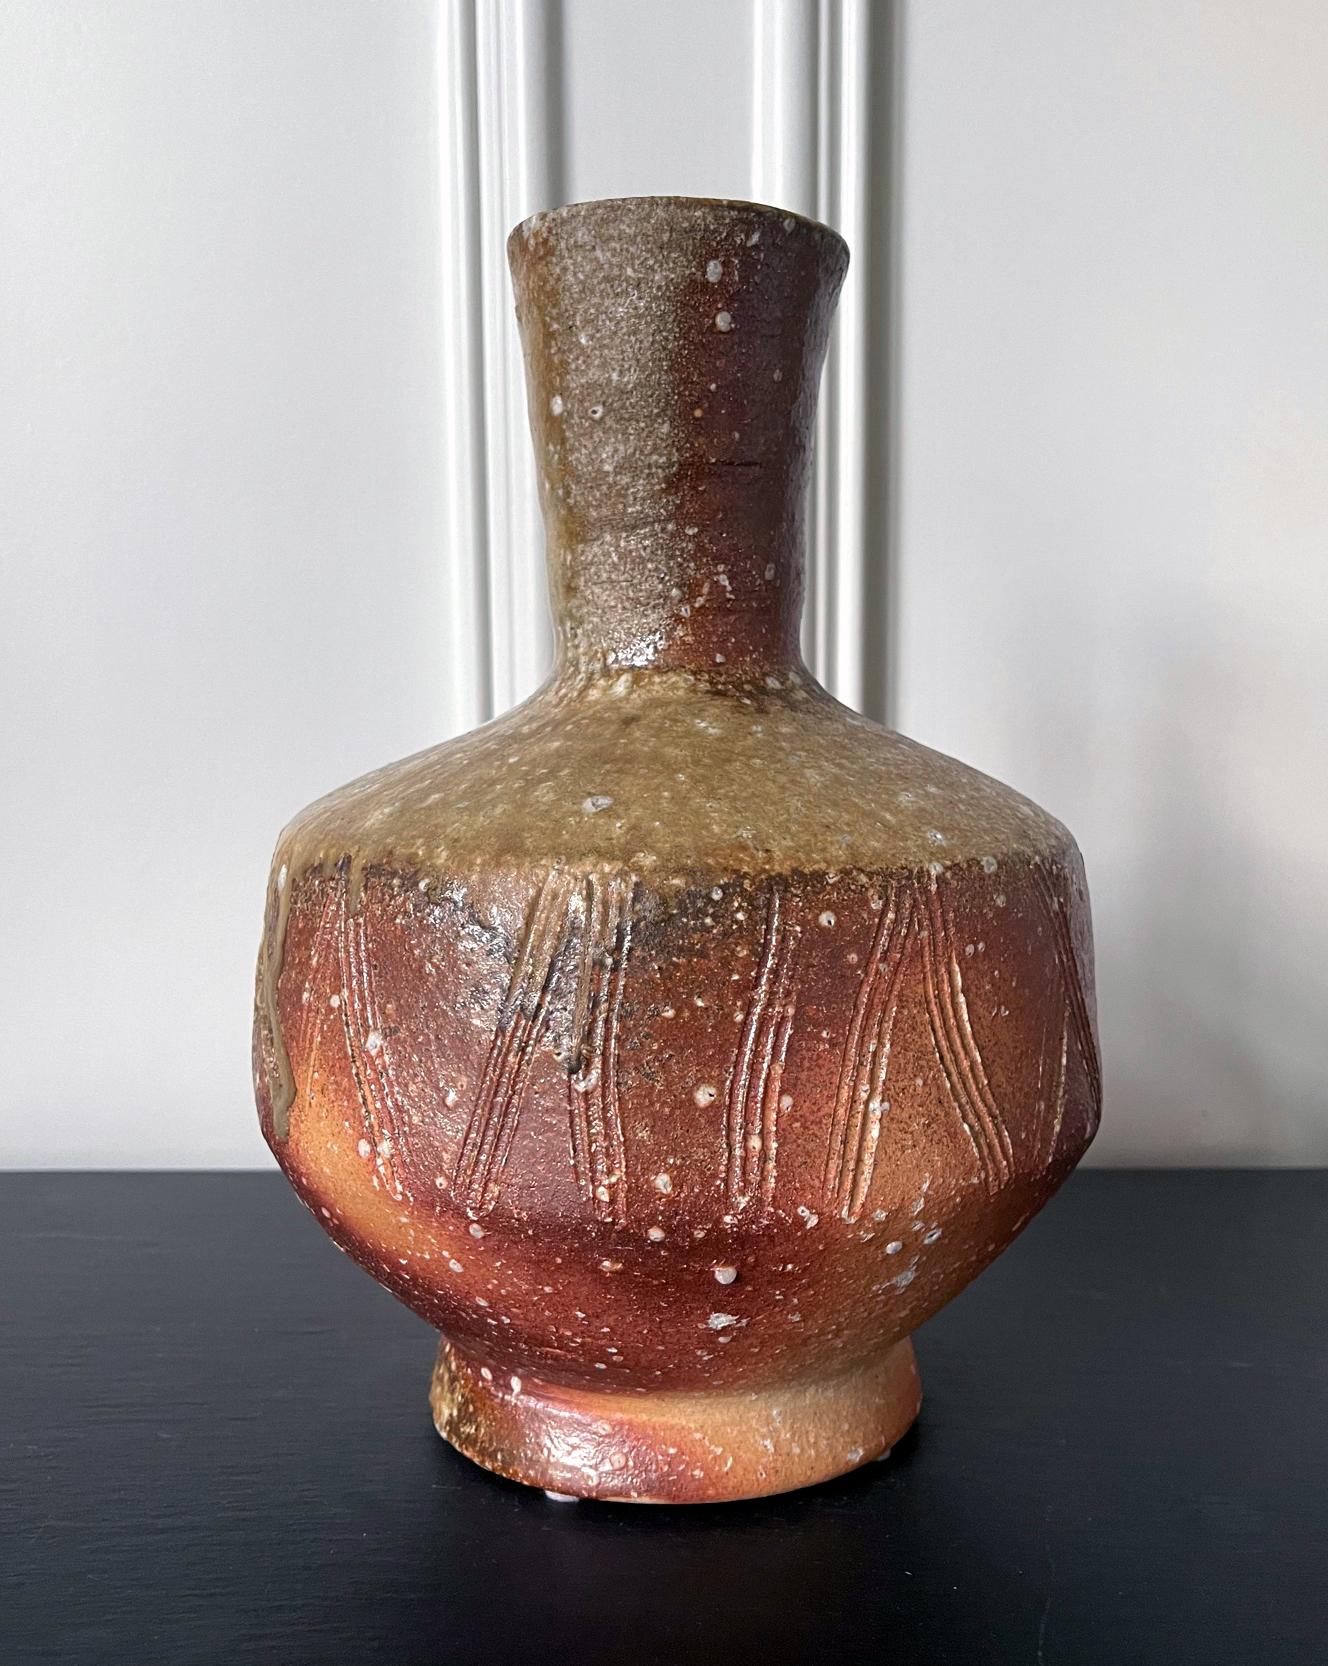 A tall ceramic vase made in the tradition of Shigaraki ware by Japanese potter Takahashi Shunsai (1927-2011), the fourth heir of the famed Rakusai lineage of potters. The vase is heavily potted in the reddish sandy Shigaraki clay. It has a Classic